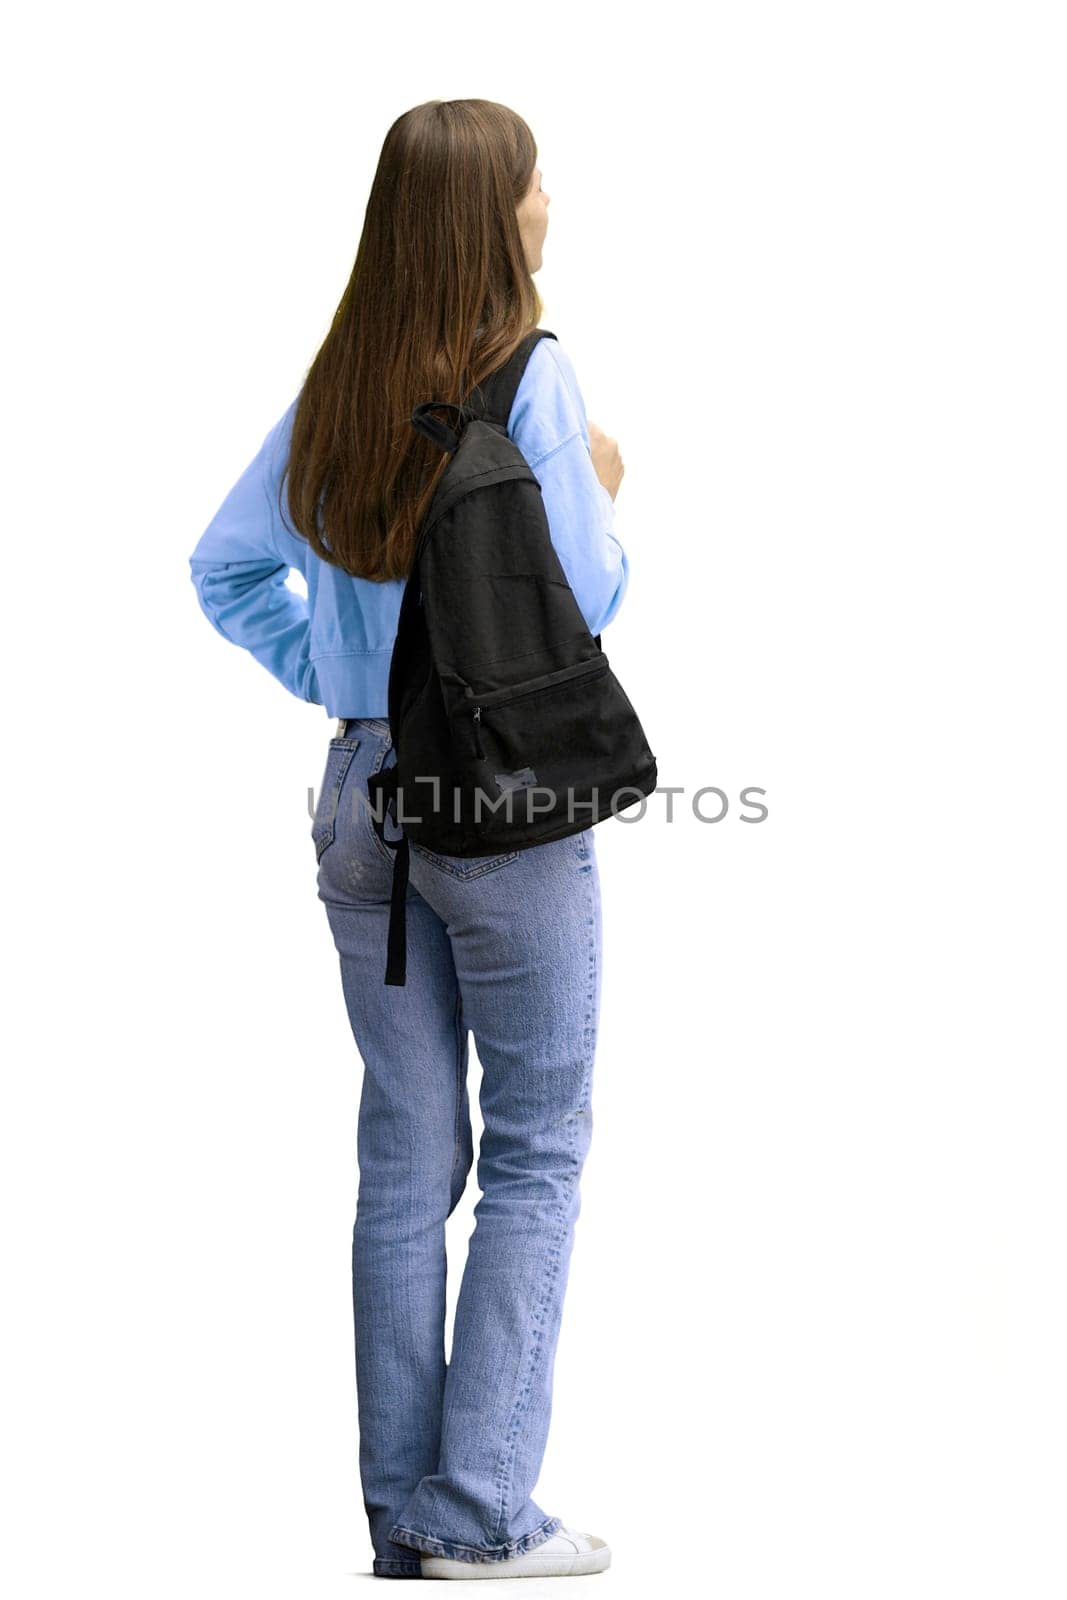 A woman, full-length, on a white background, with a backpack.